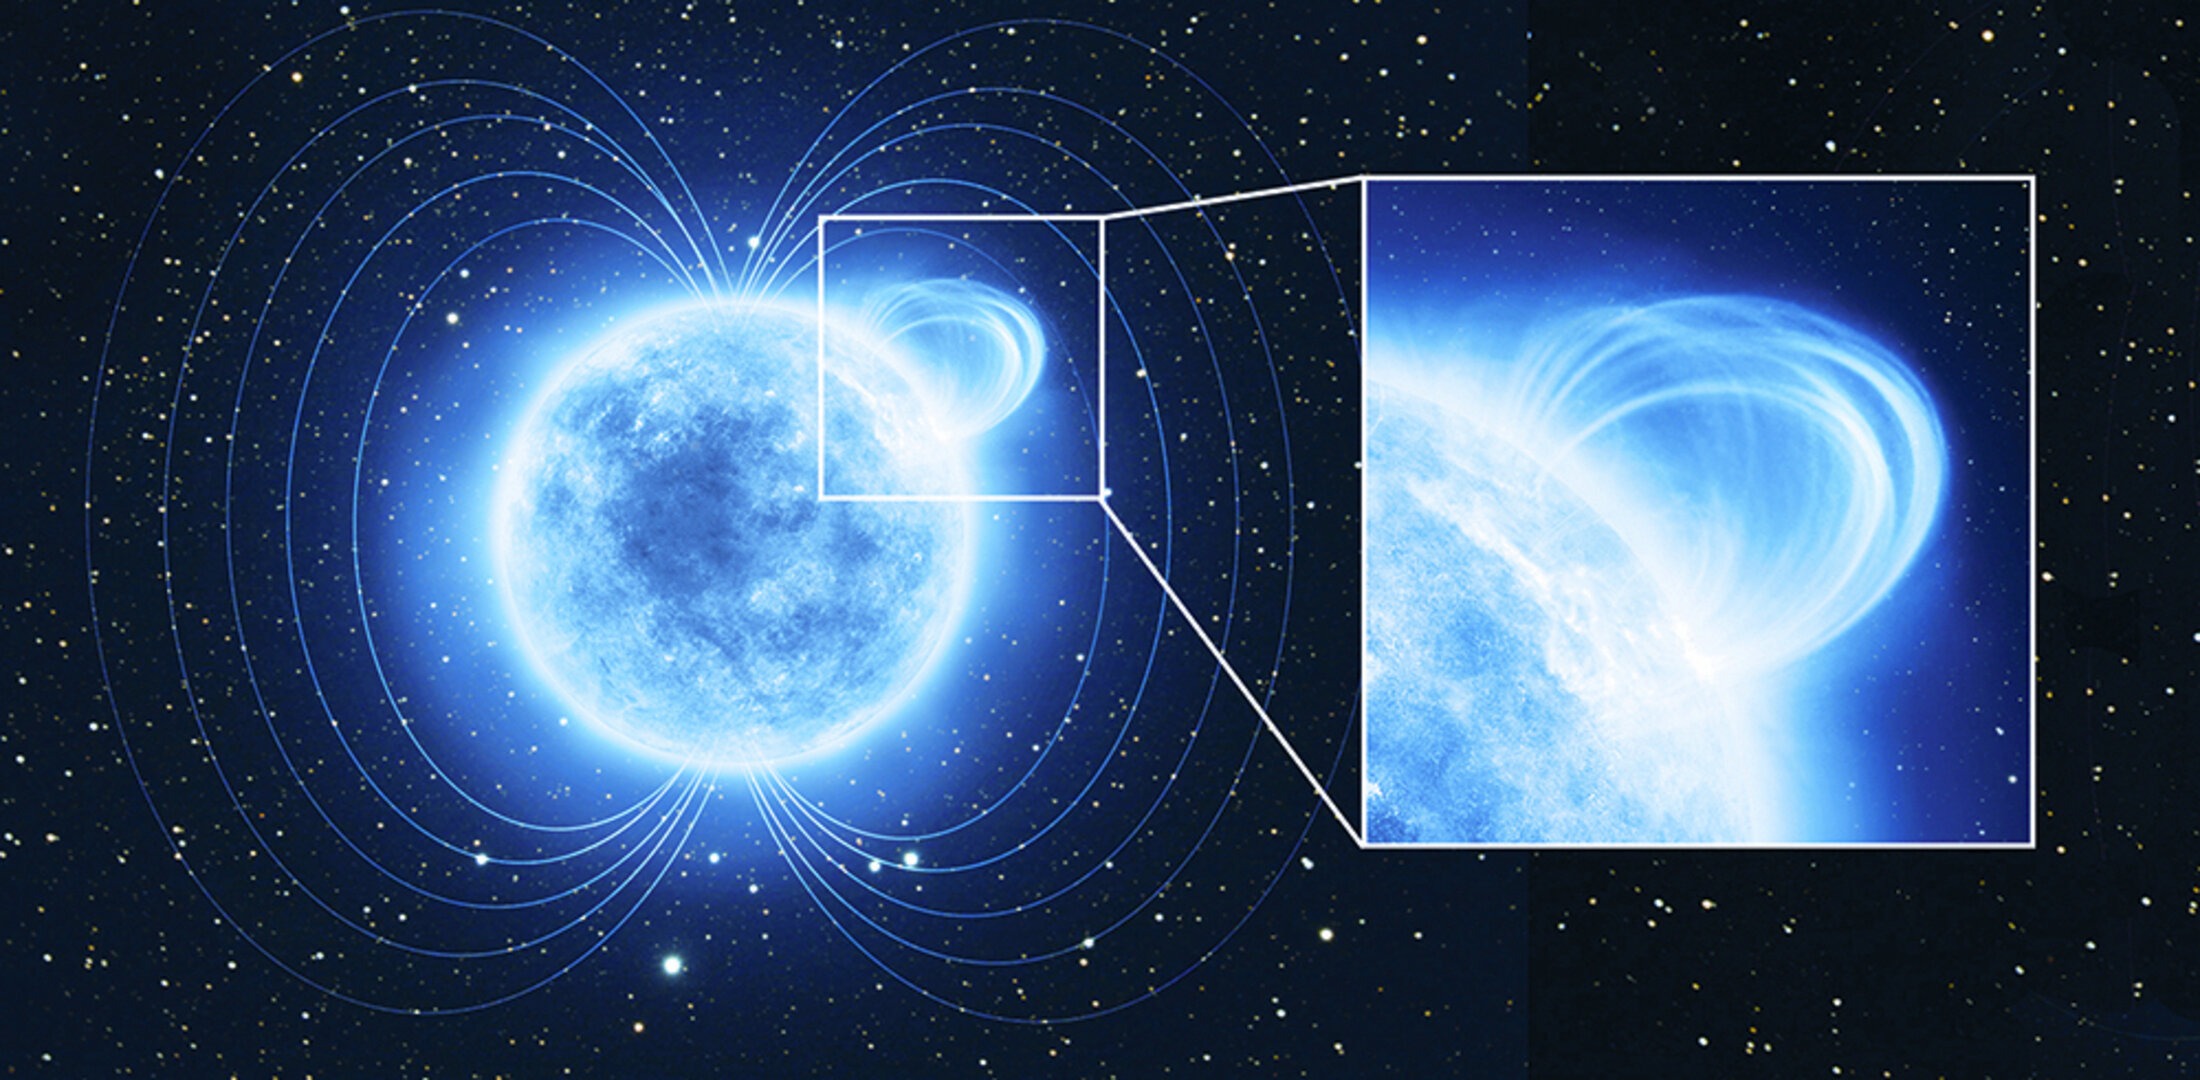 Starquakes: Space Resembles Earthquakes with Aftershocks in the Case of Fast Radio Bursts